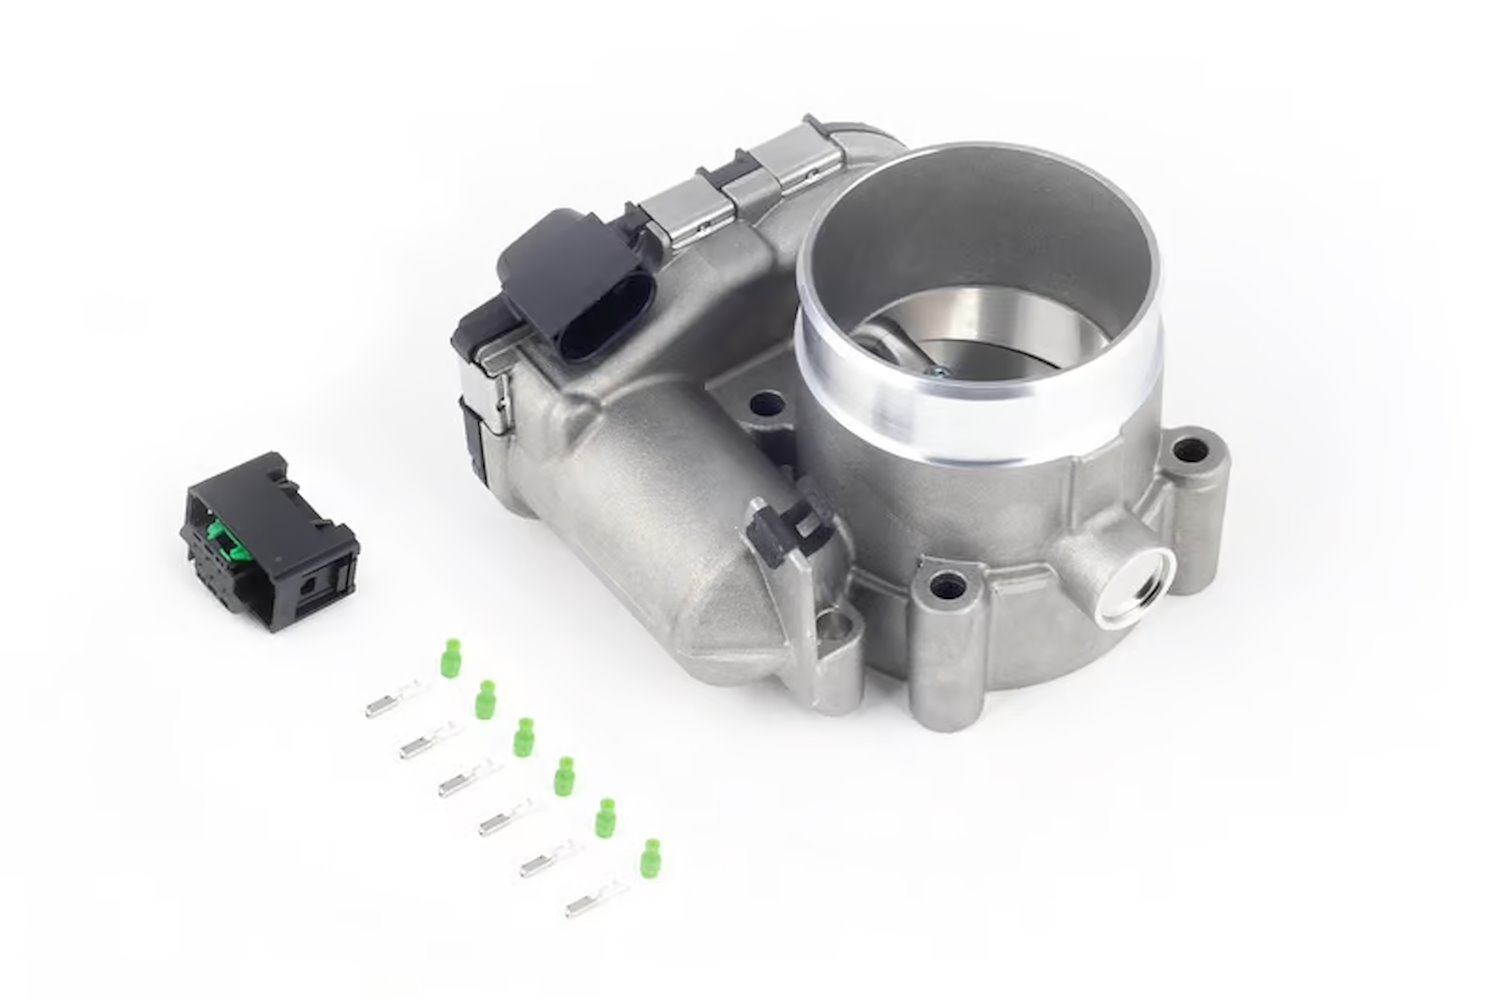 HT-011800 Bosch 60 mm Electronic Throttle Body, Includes Connector and-Pins